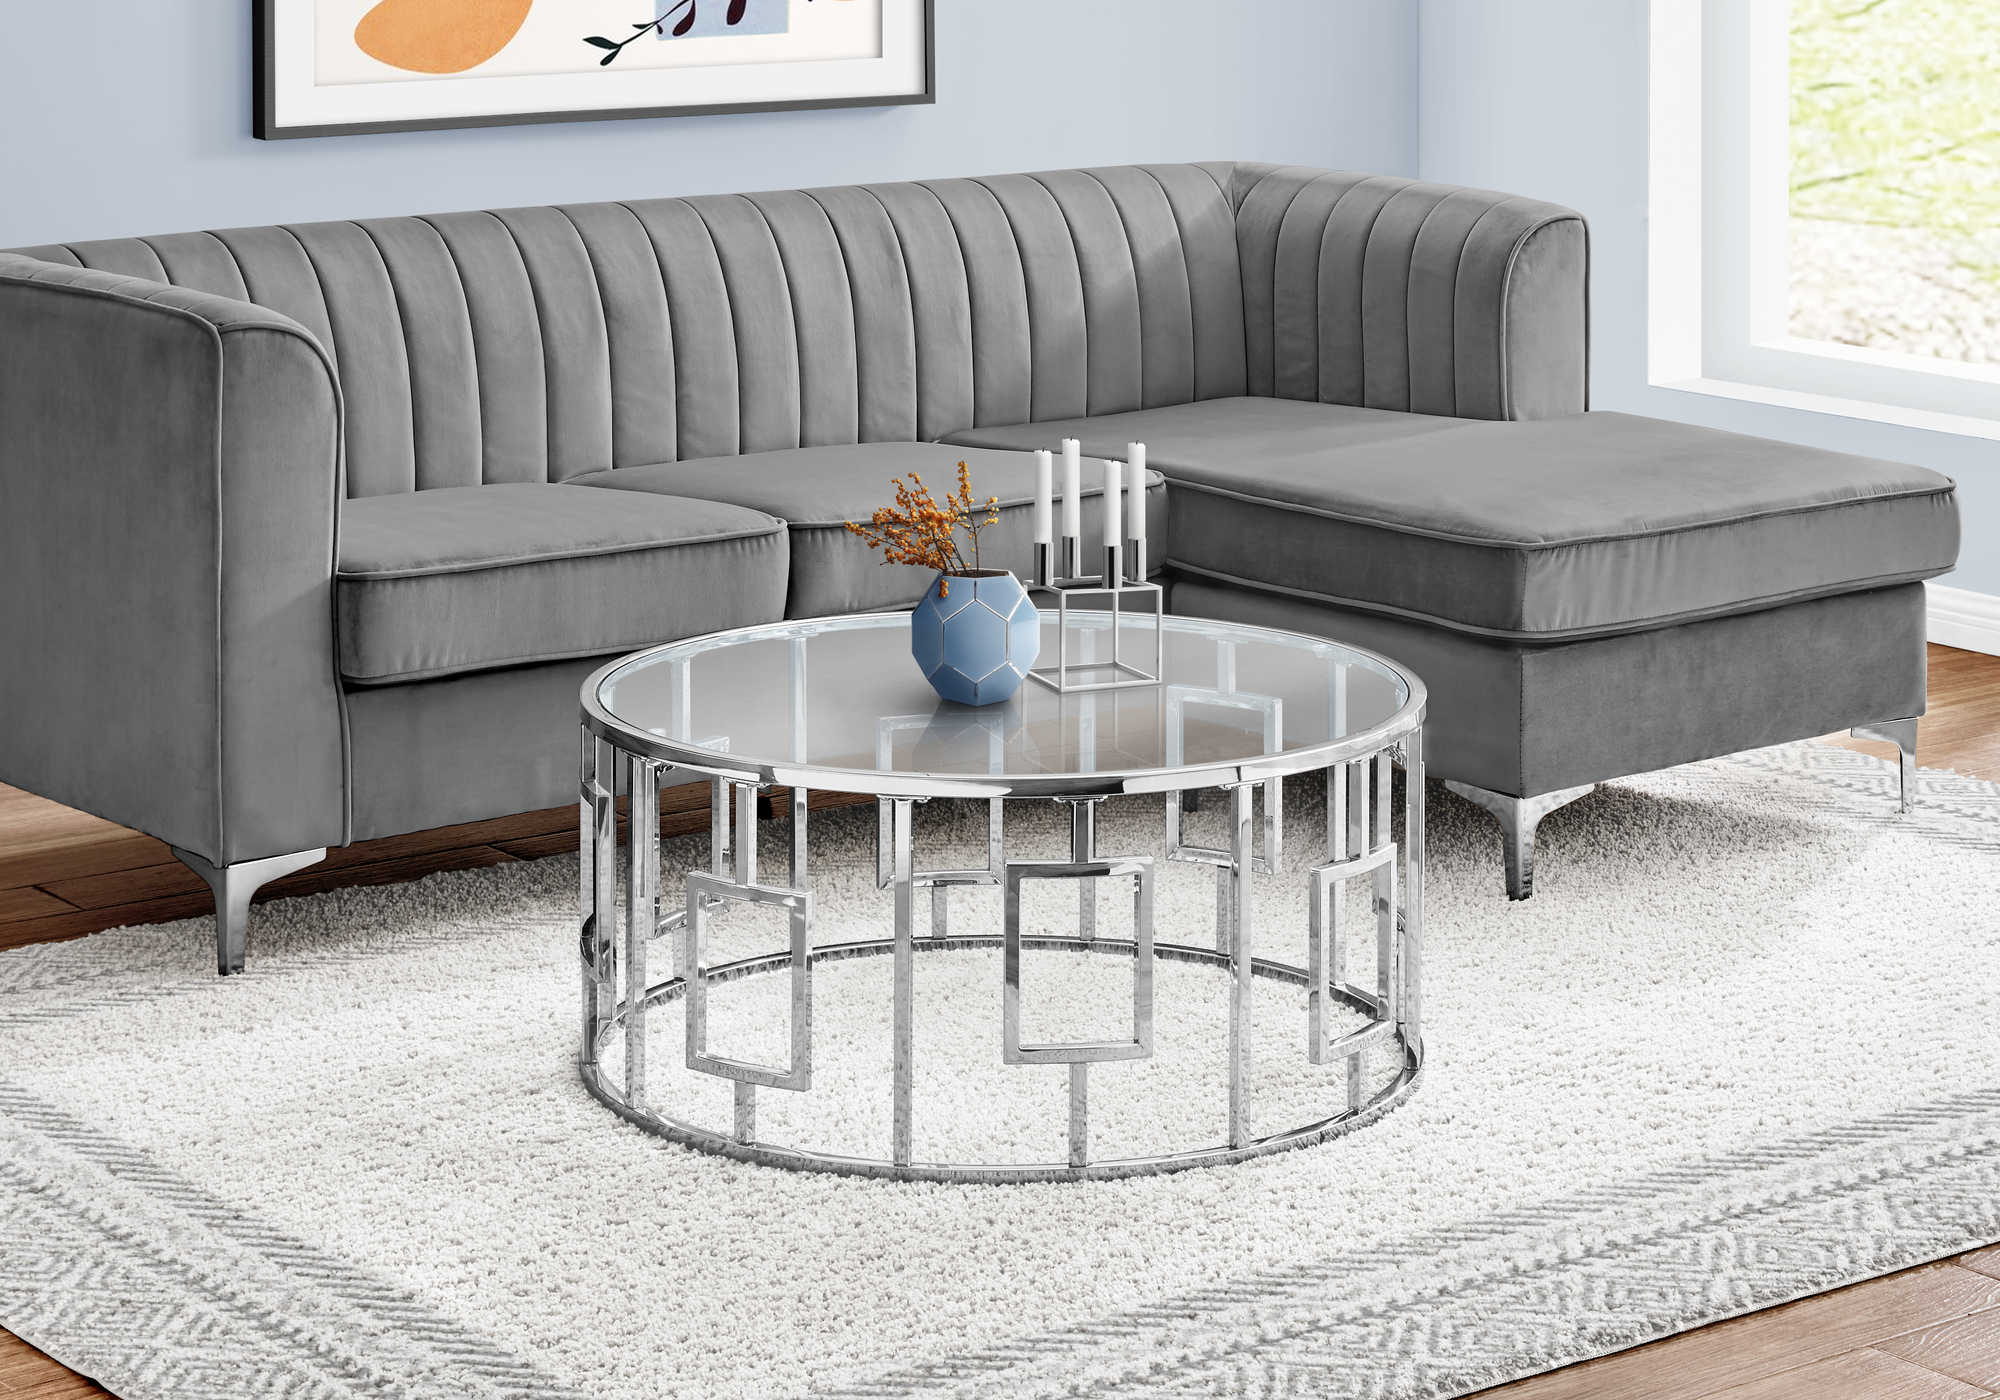 COFFEE TABLE - 36"DIA / CHROME METAL WITH TEMPERED GLASS